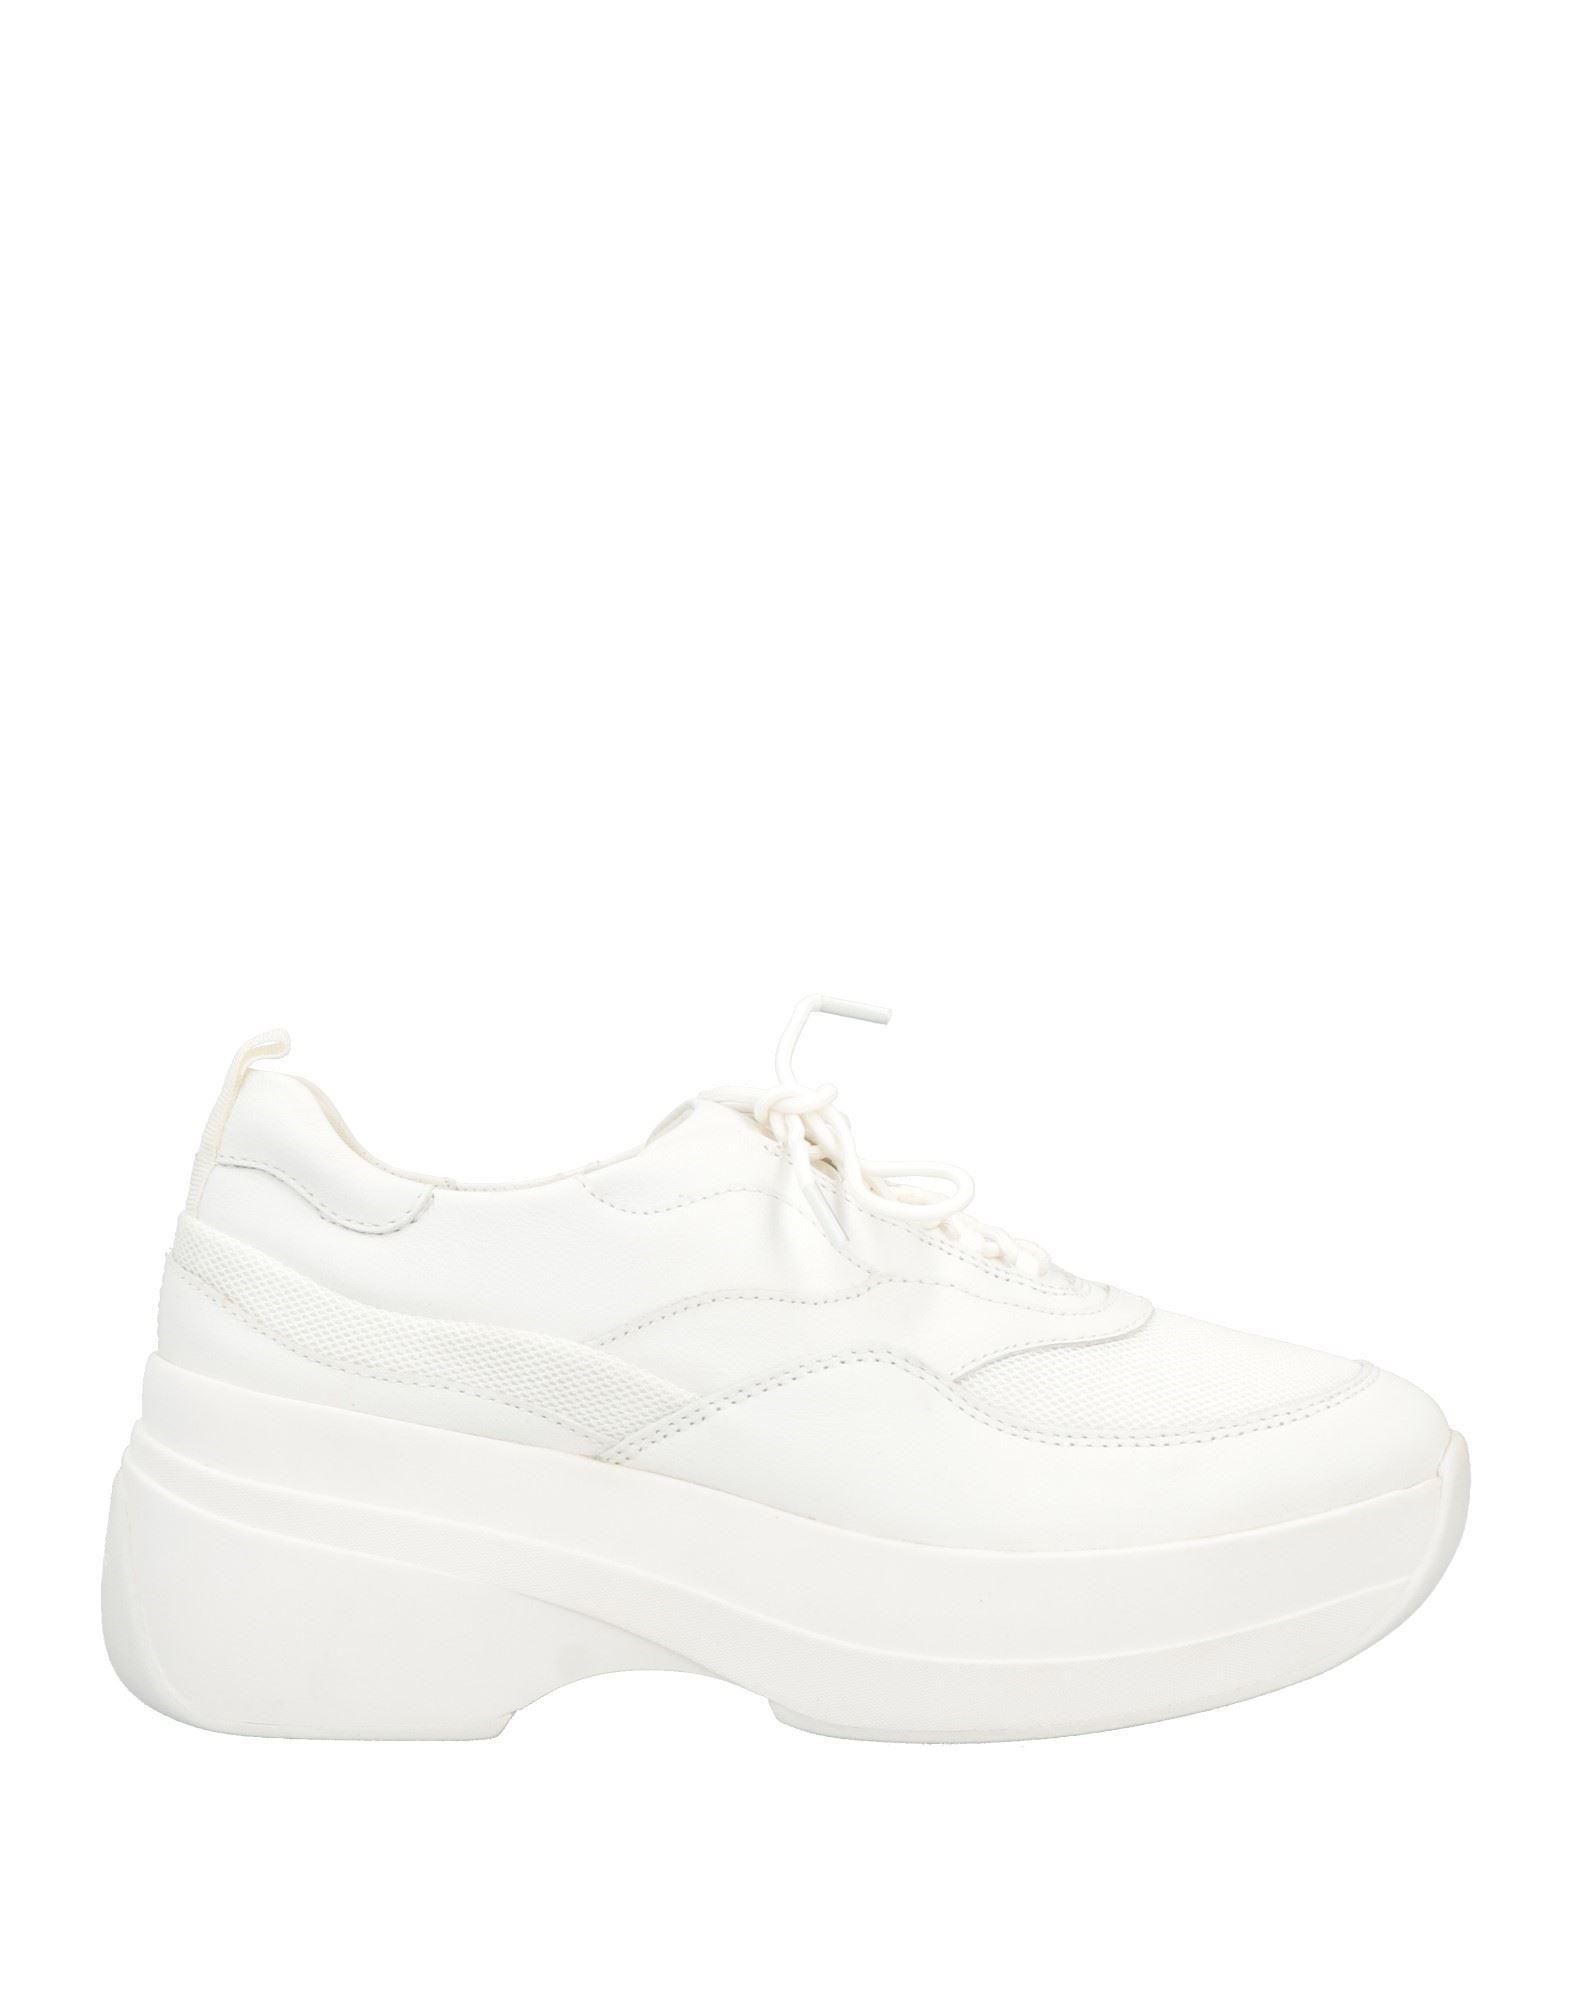 Vagabond Shoemakers Sneakers in White | Lyst